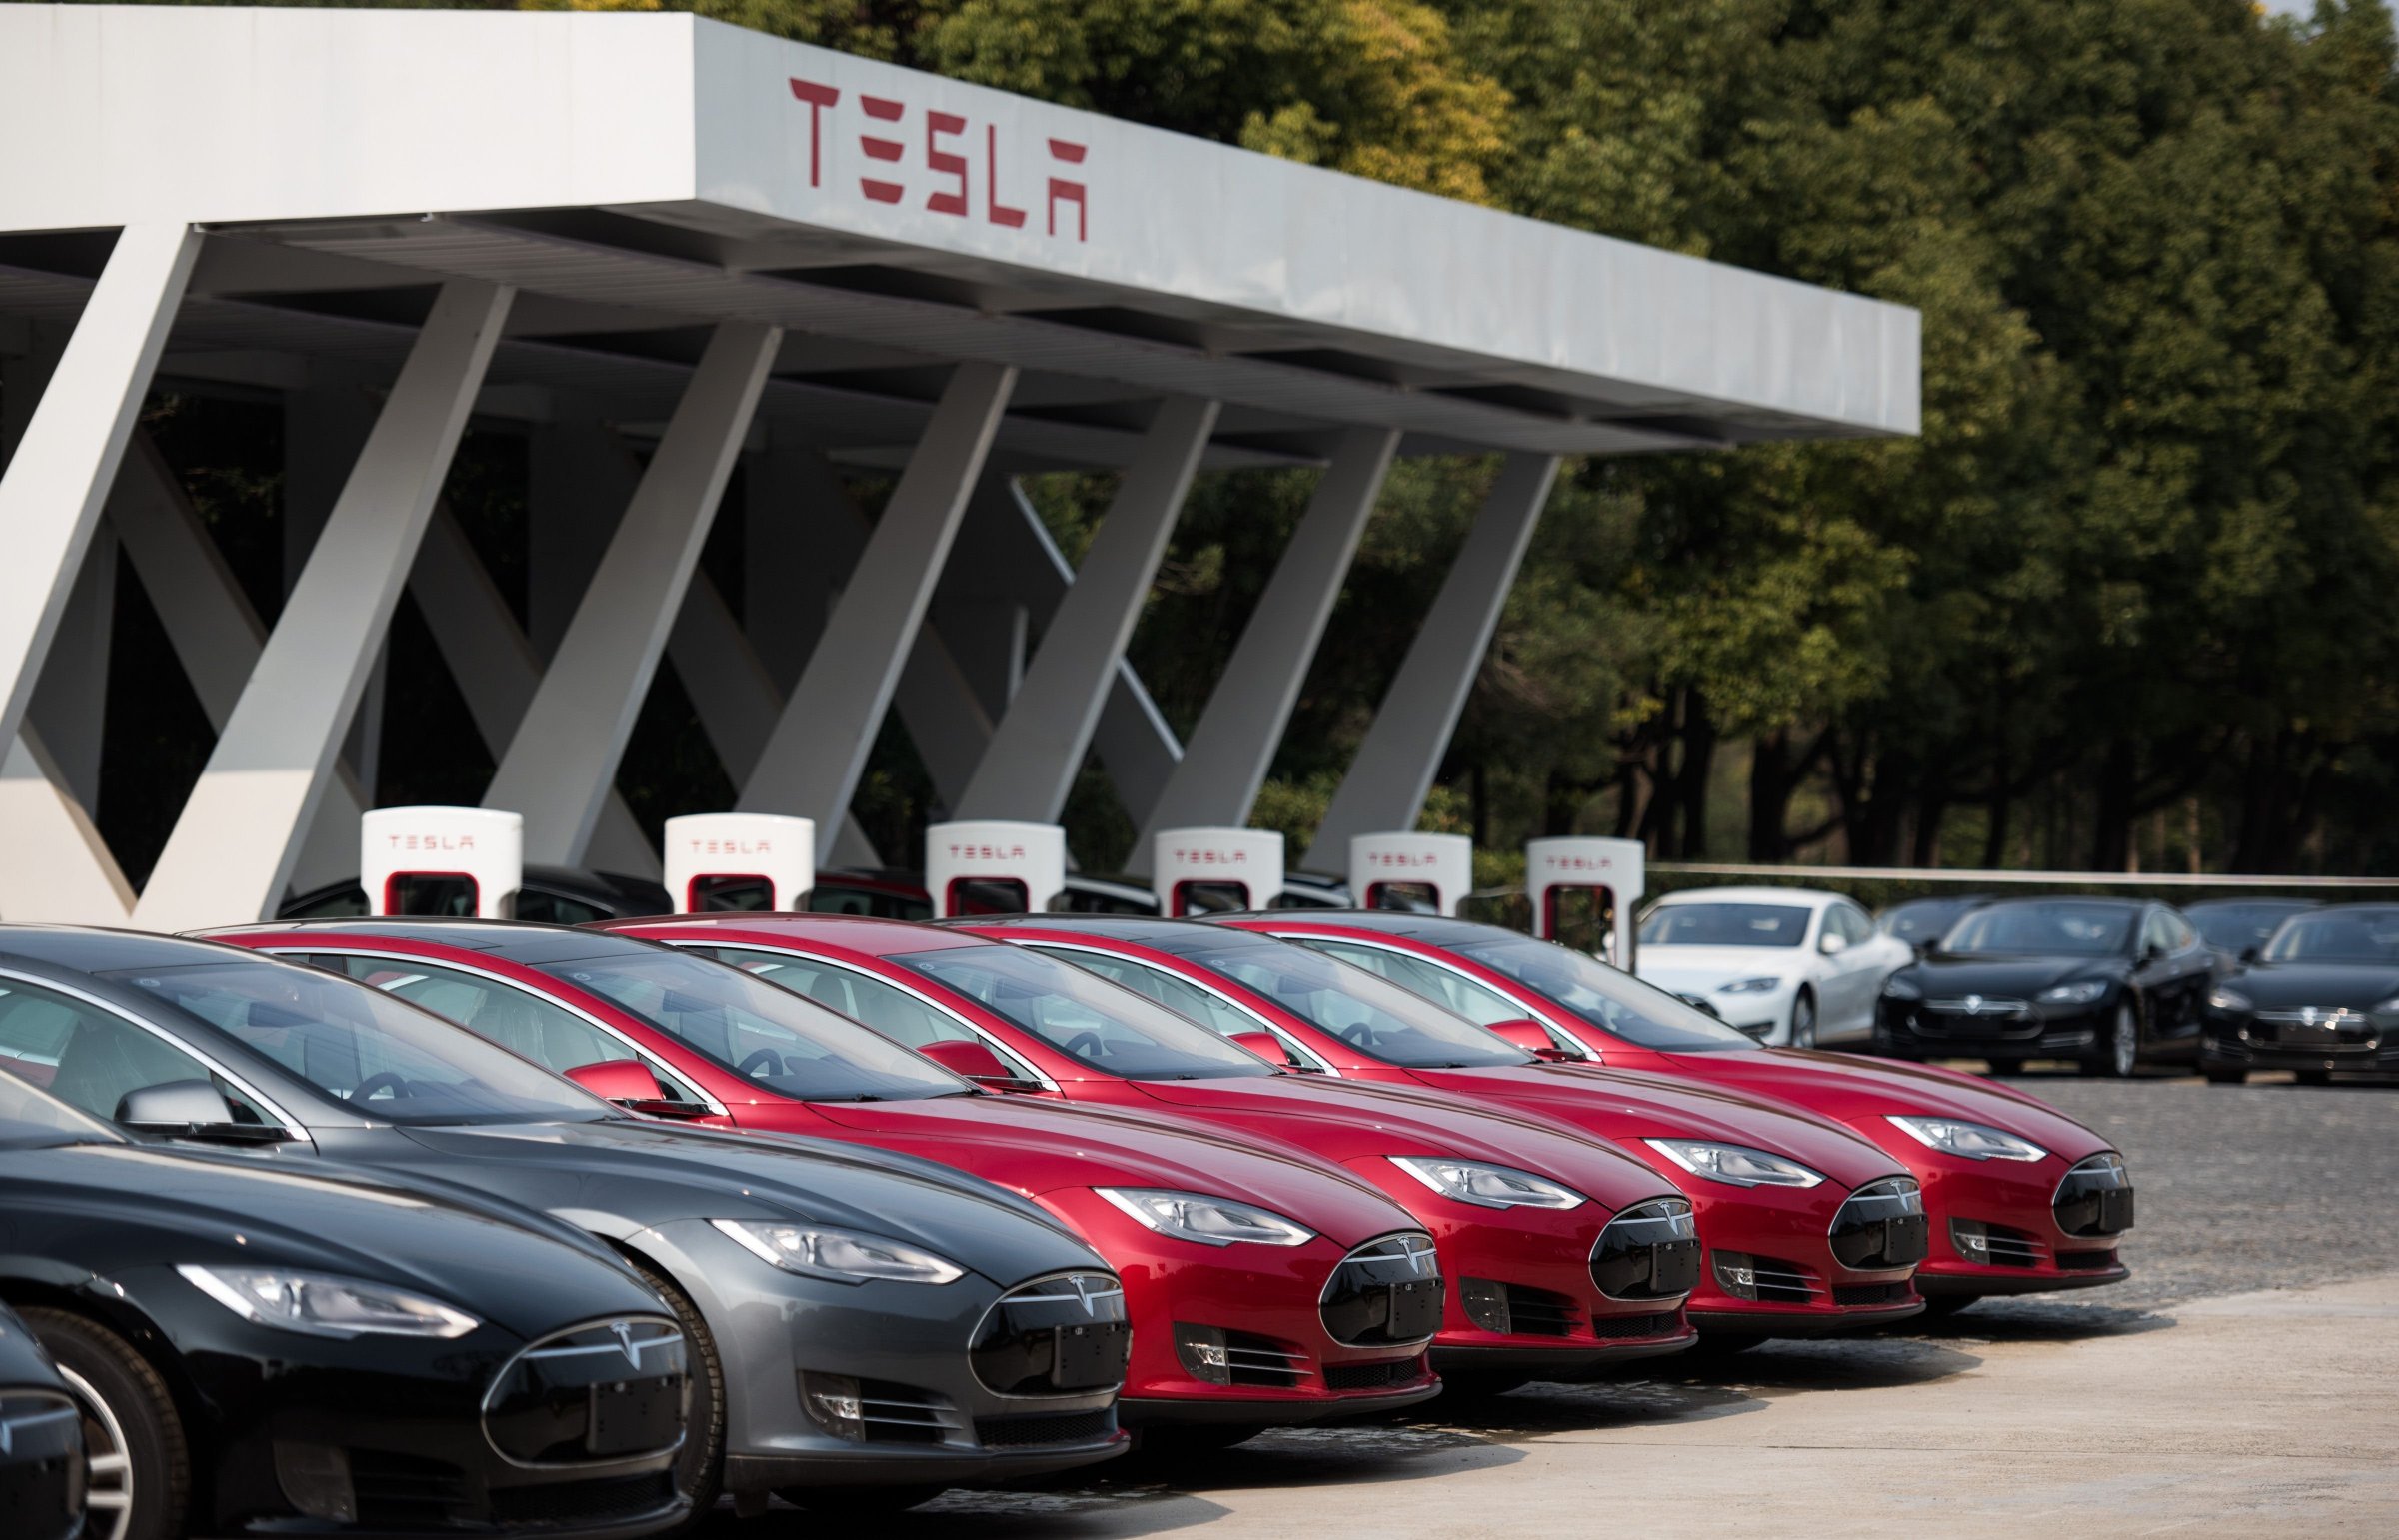 Tesla Model S vehicles parked outside a car dealership in Shanghai on March 17, 2015.